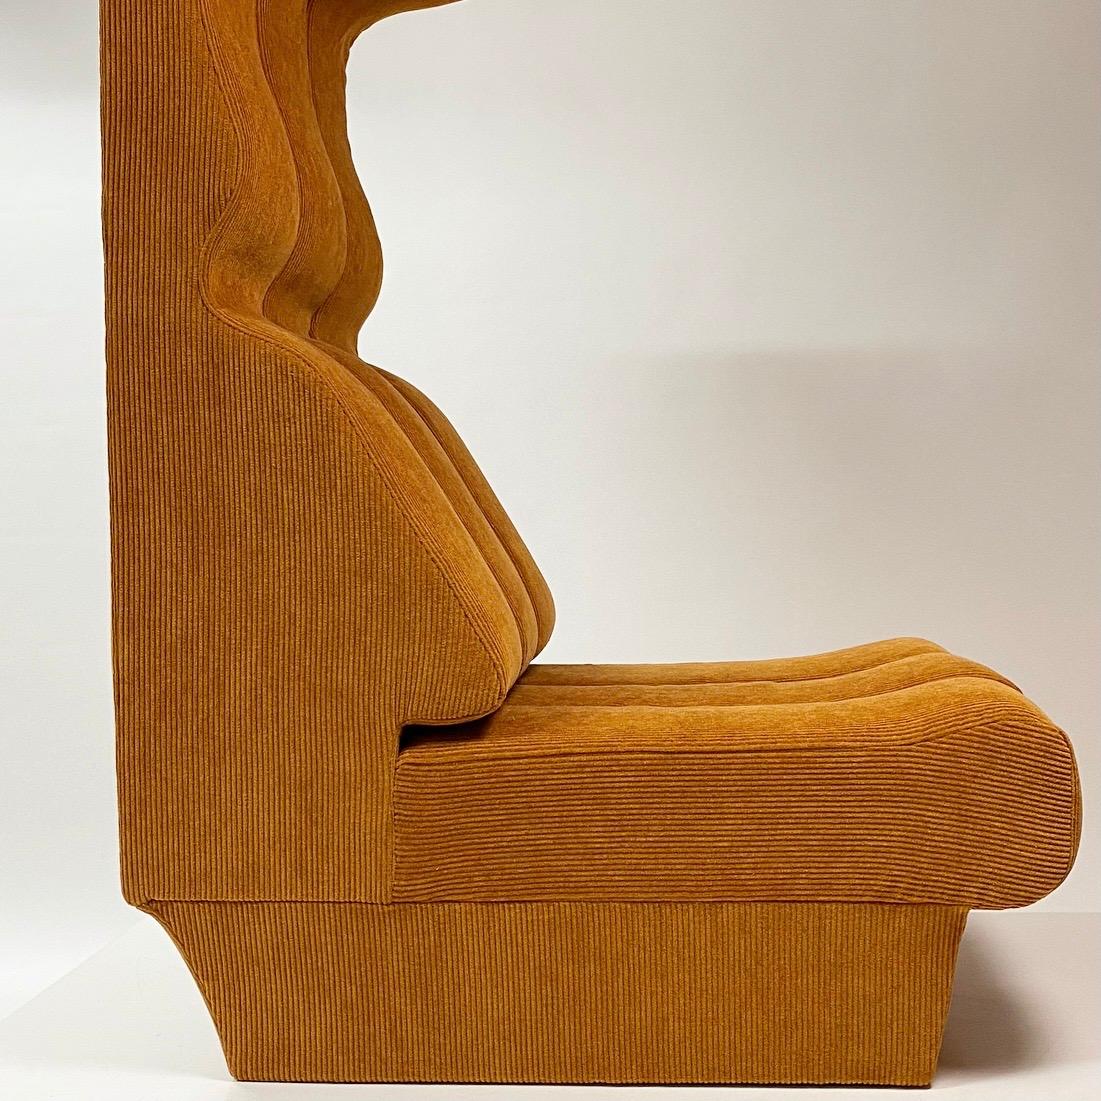 Interlübke Highback Space Age Seat with New Upholstery, Germany, 1970 For Sale 8